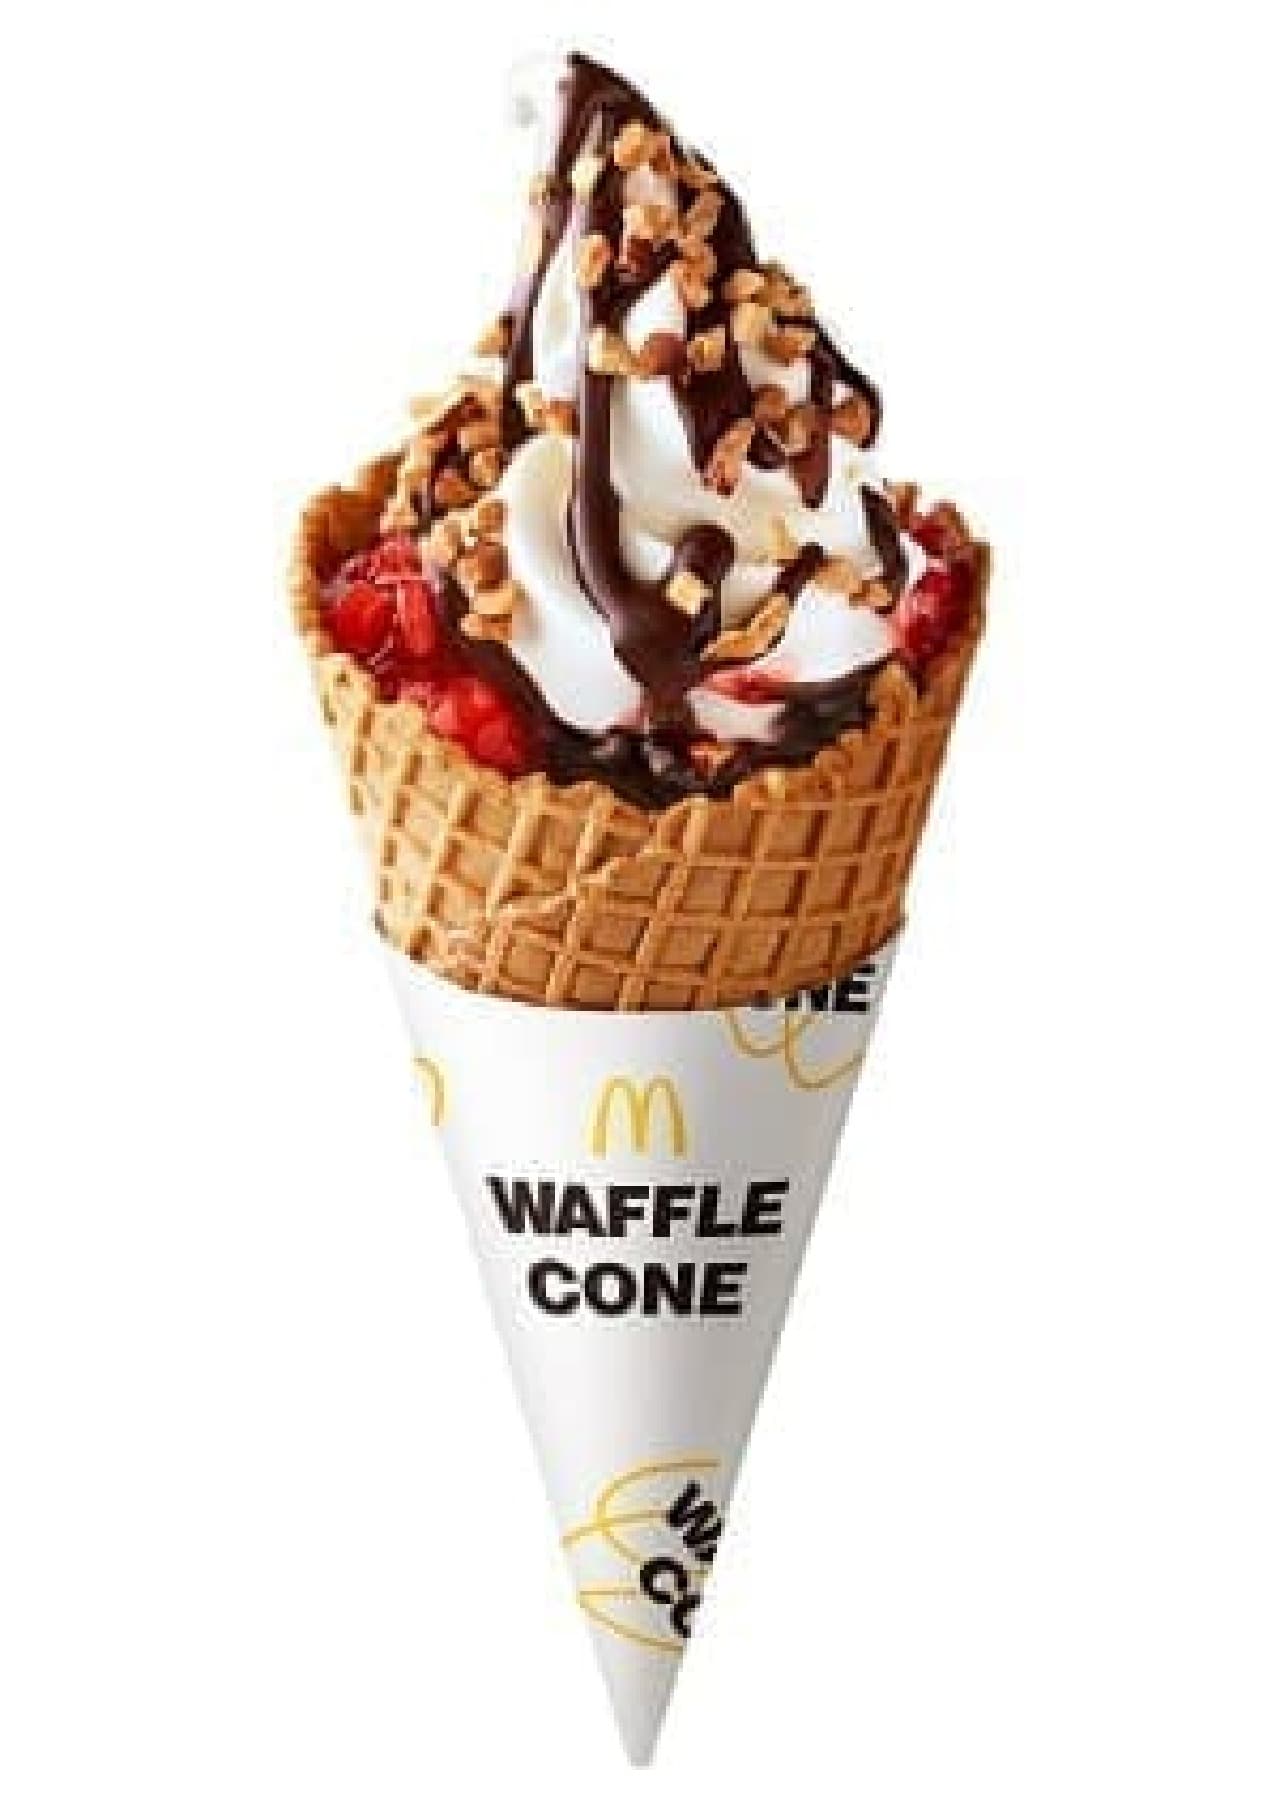 McDonald's new work "Waffle cone all over"